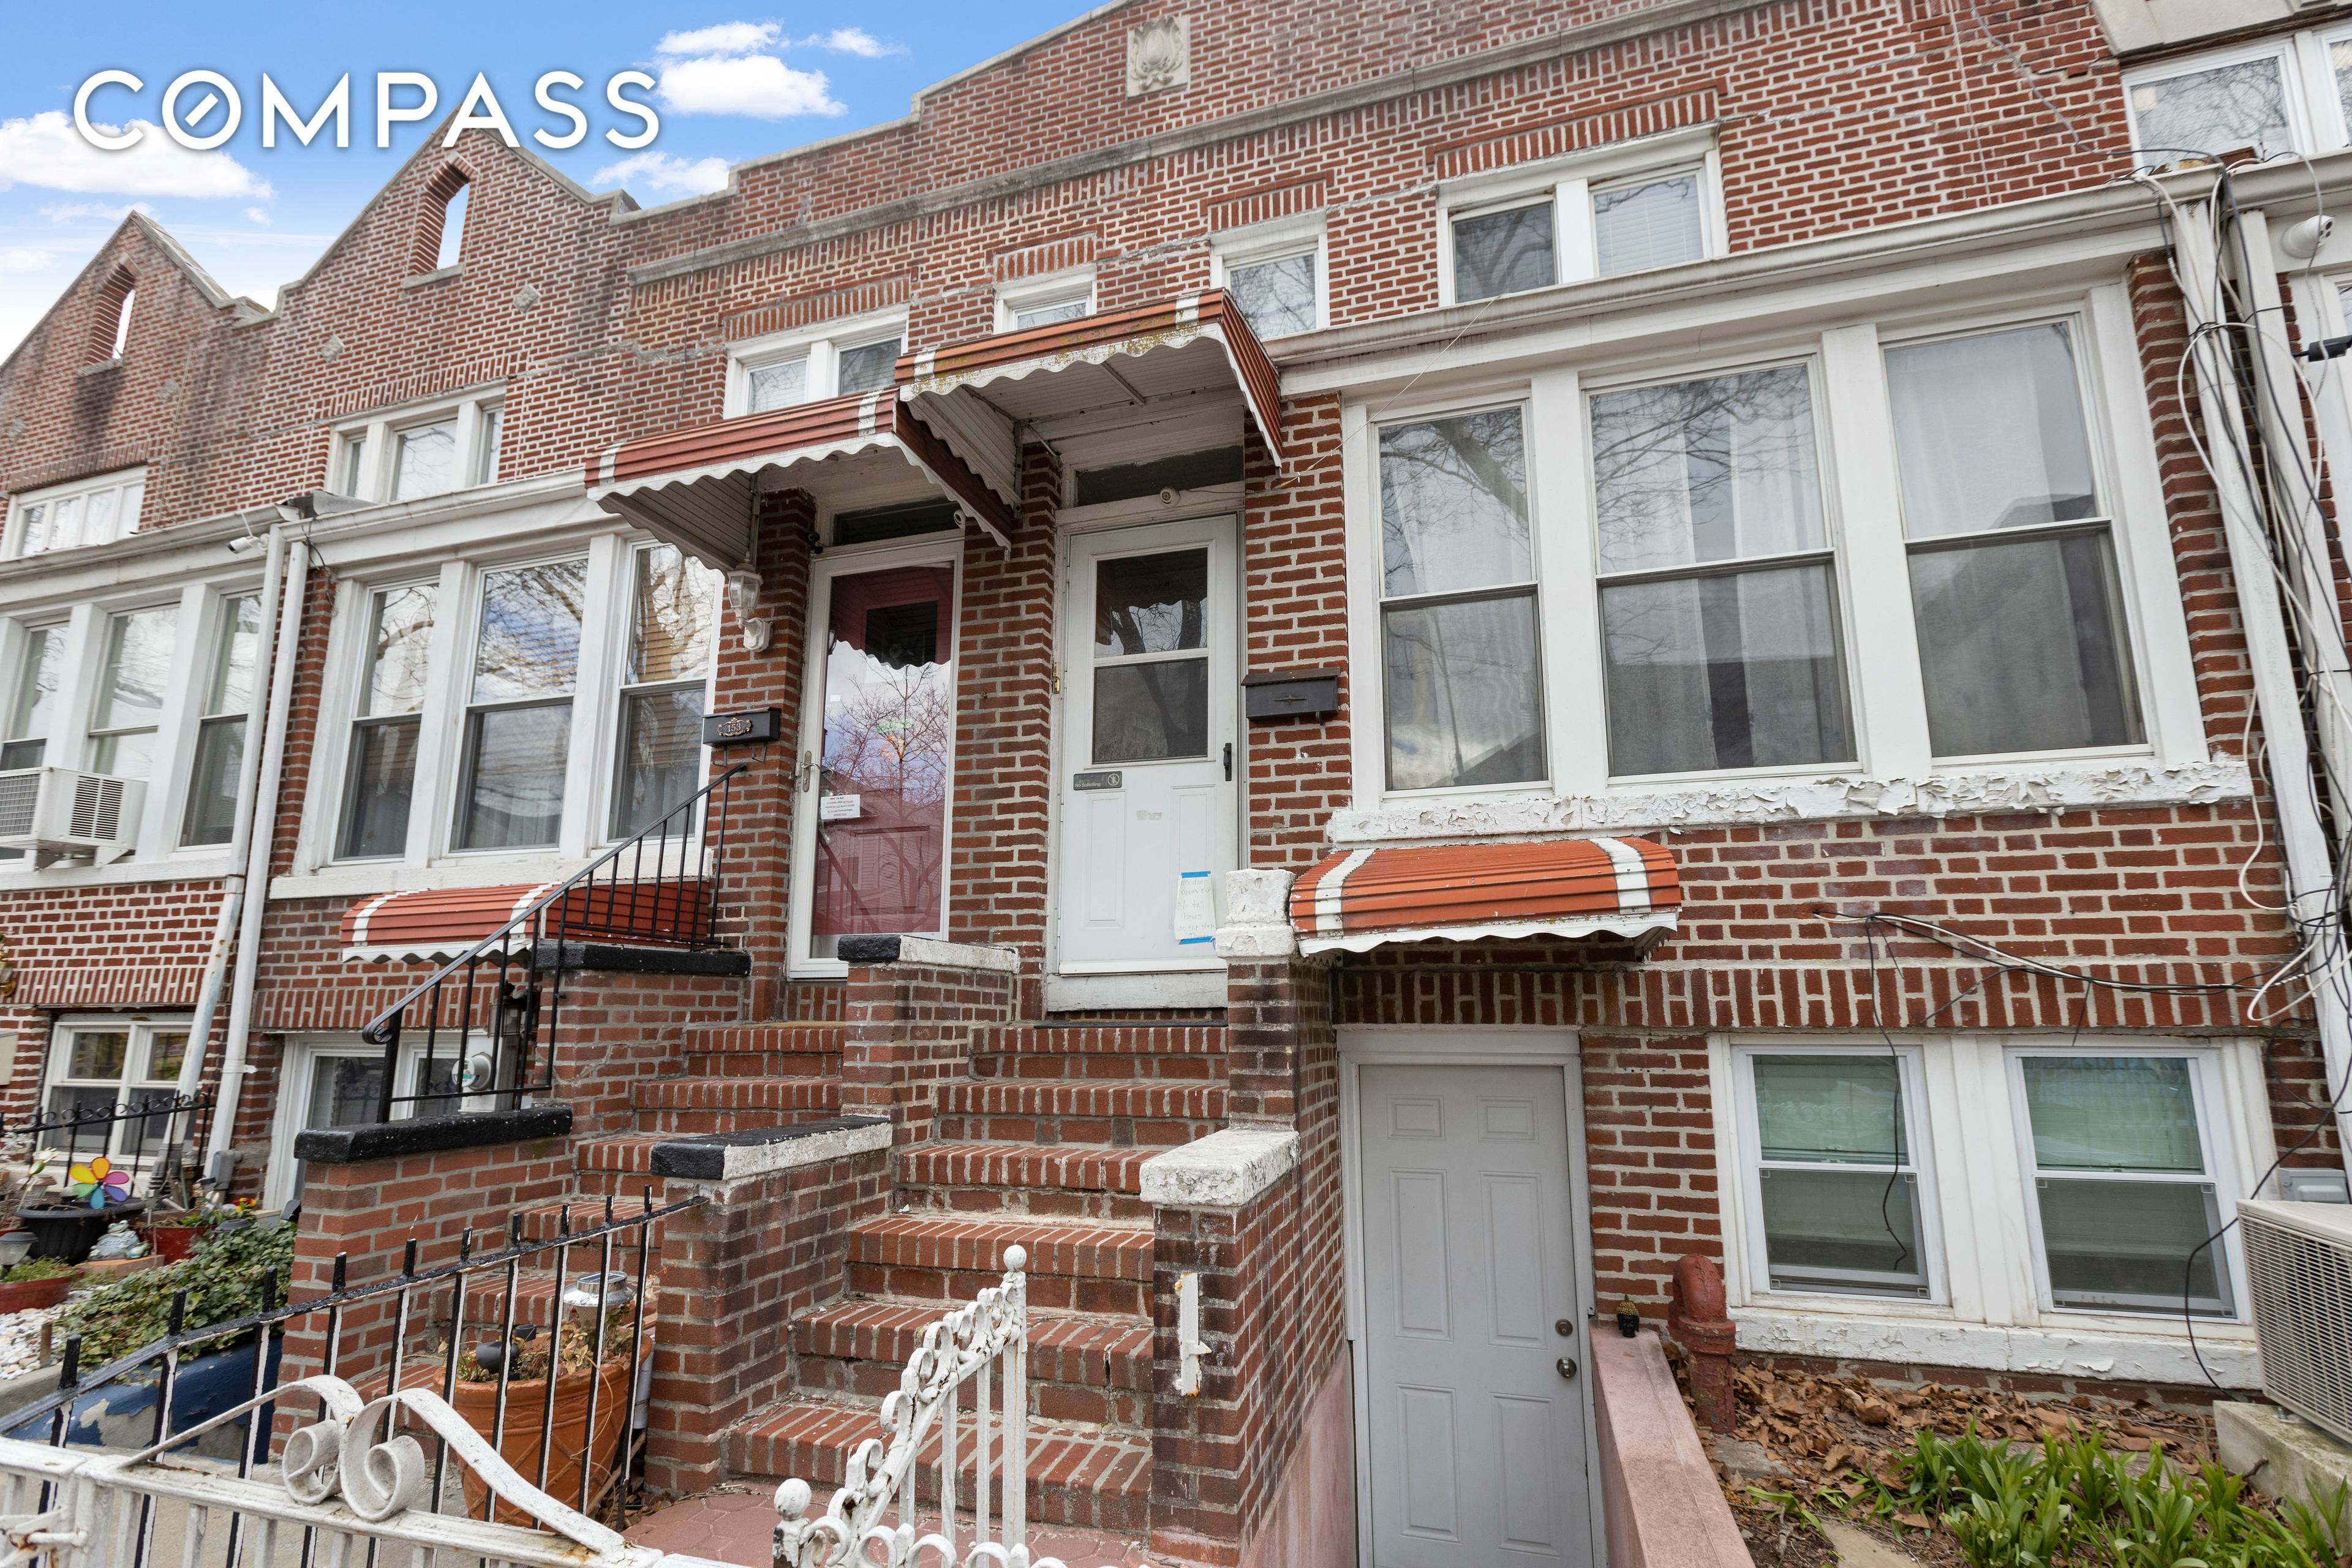 This adorable mother daughter two family brick home has parking and is only 900 feet from 2 5 Trains at Nostrand Avenue and Beverly Road.